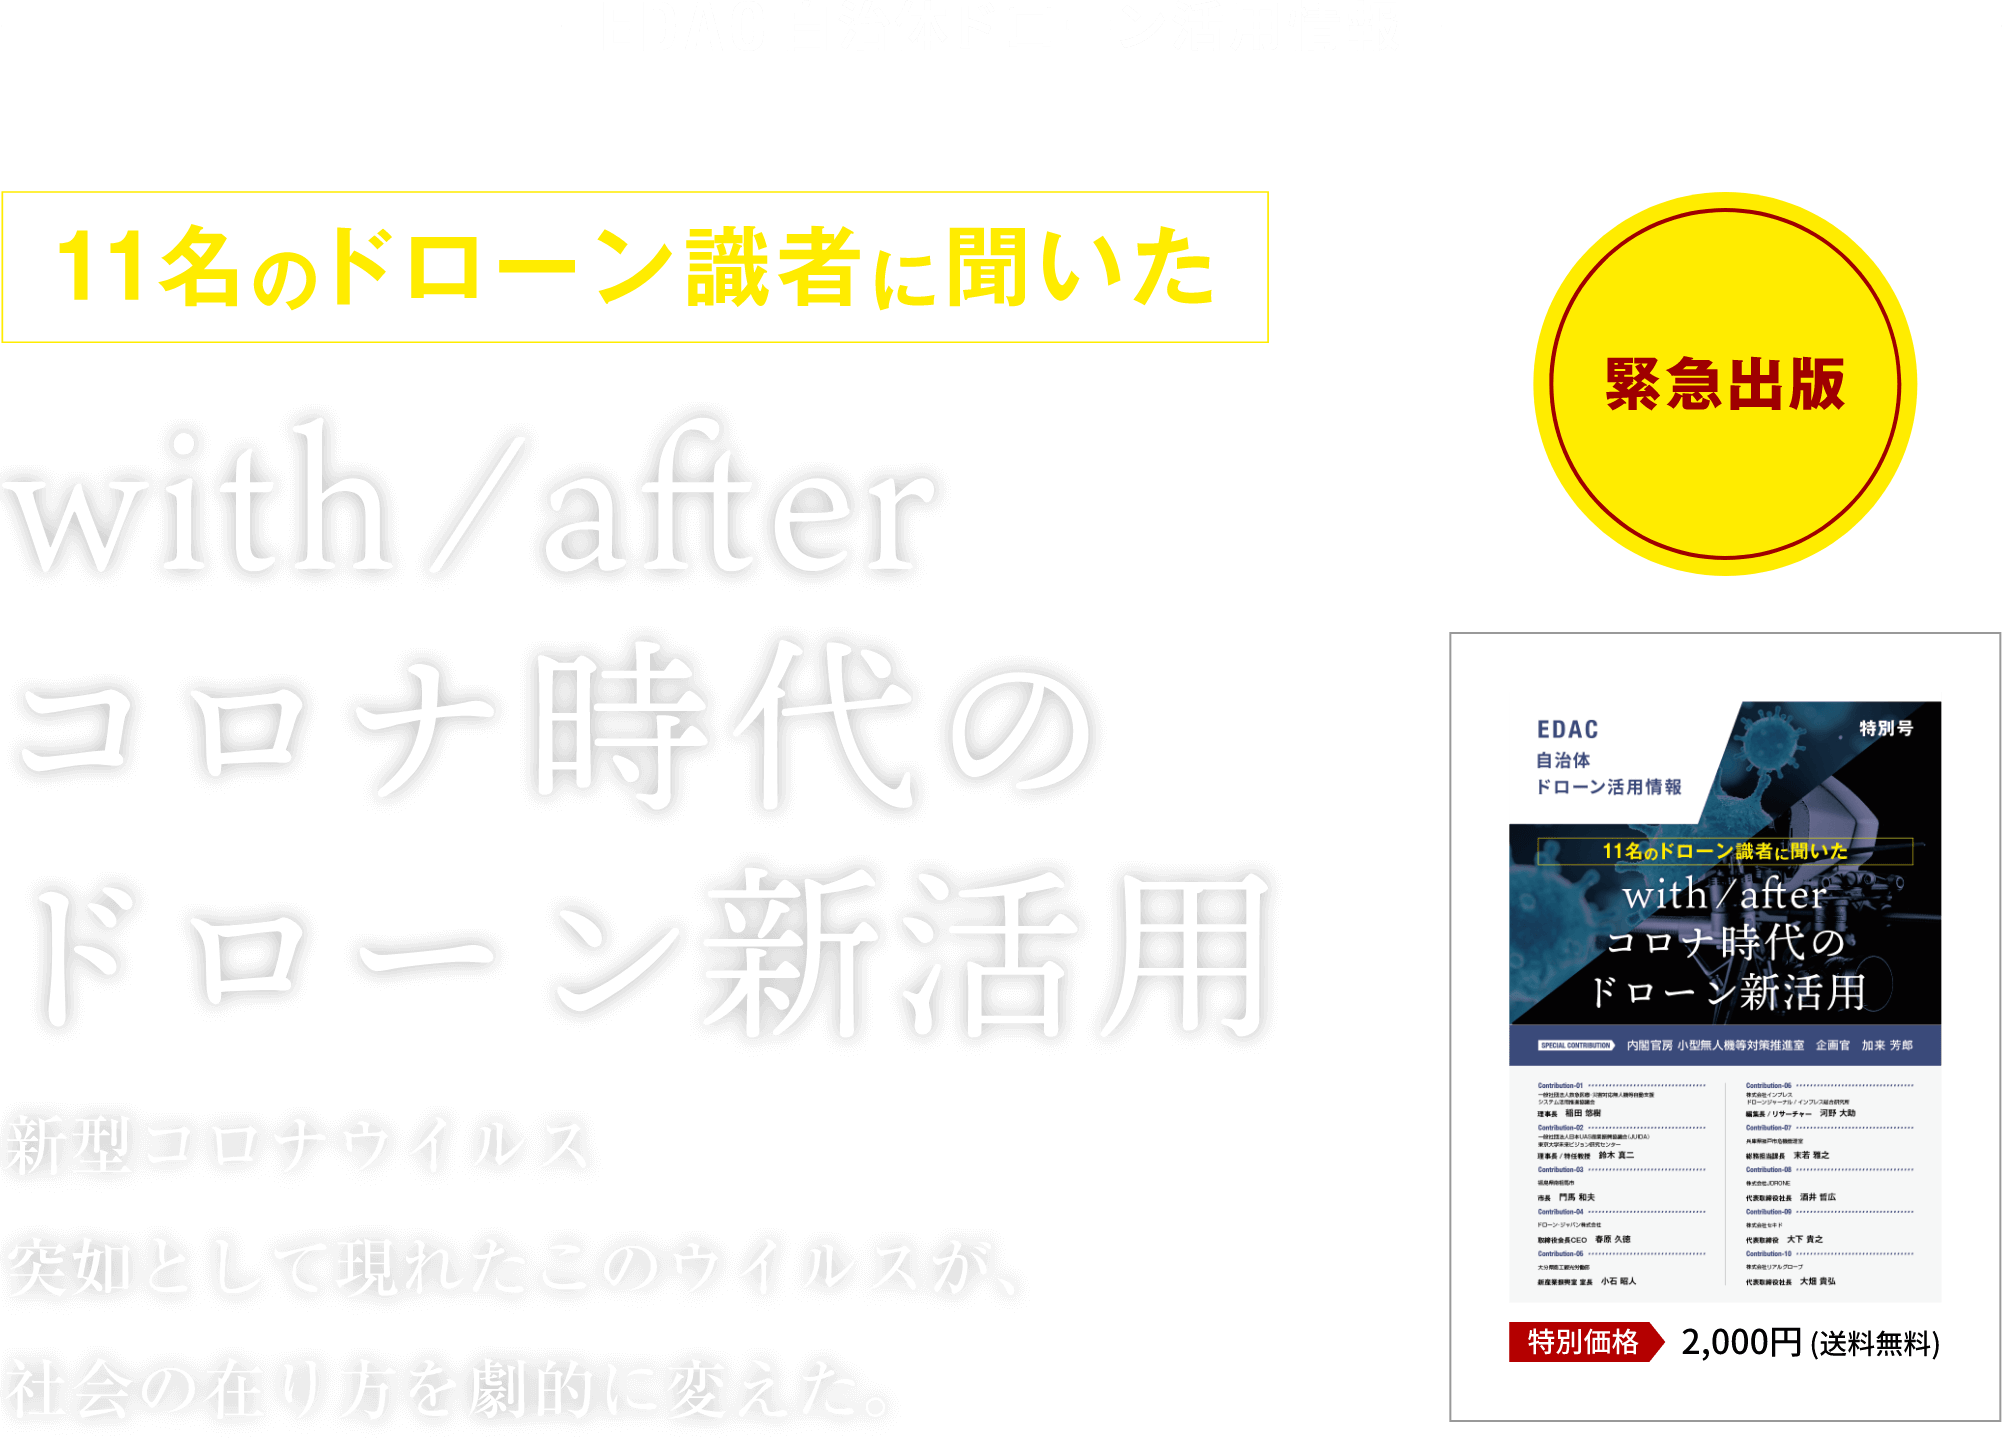 「with / after コロナ時代のドローン新活用」